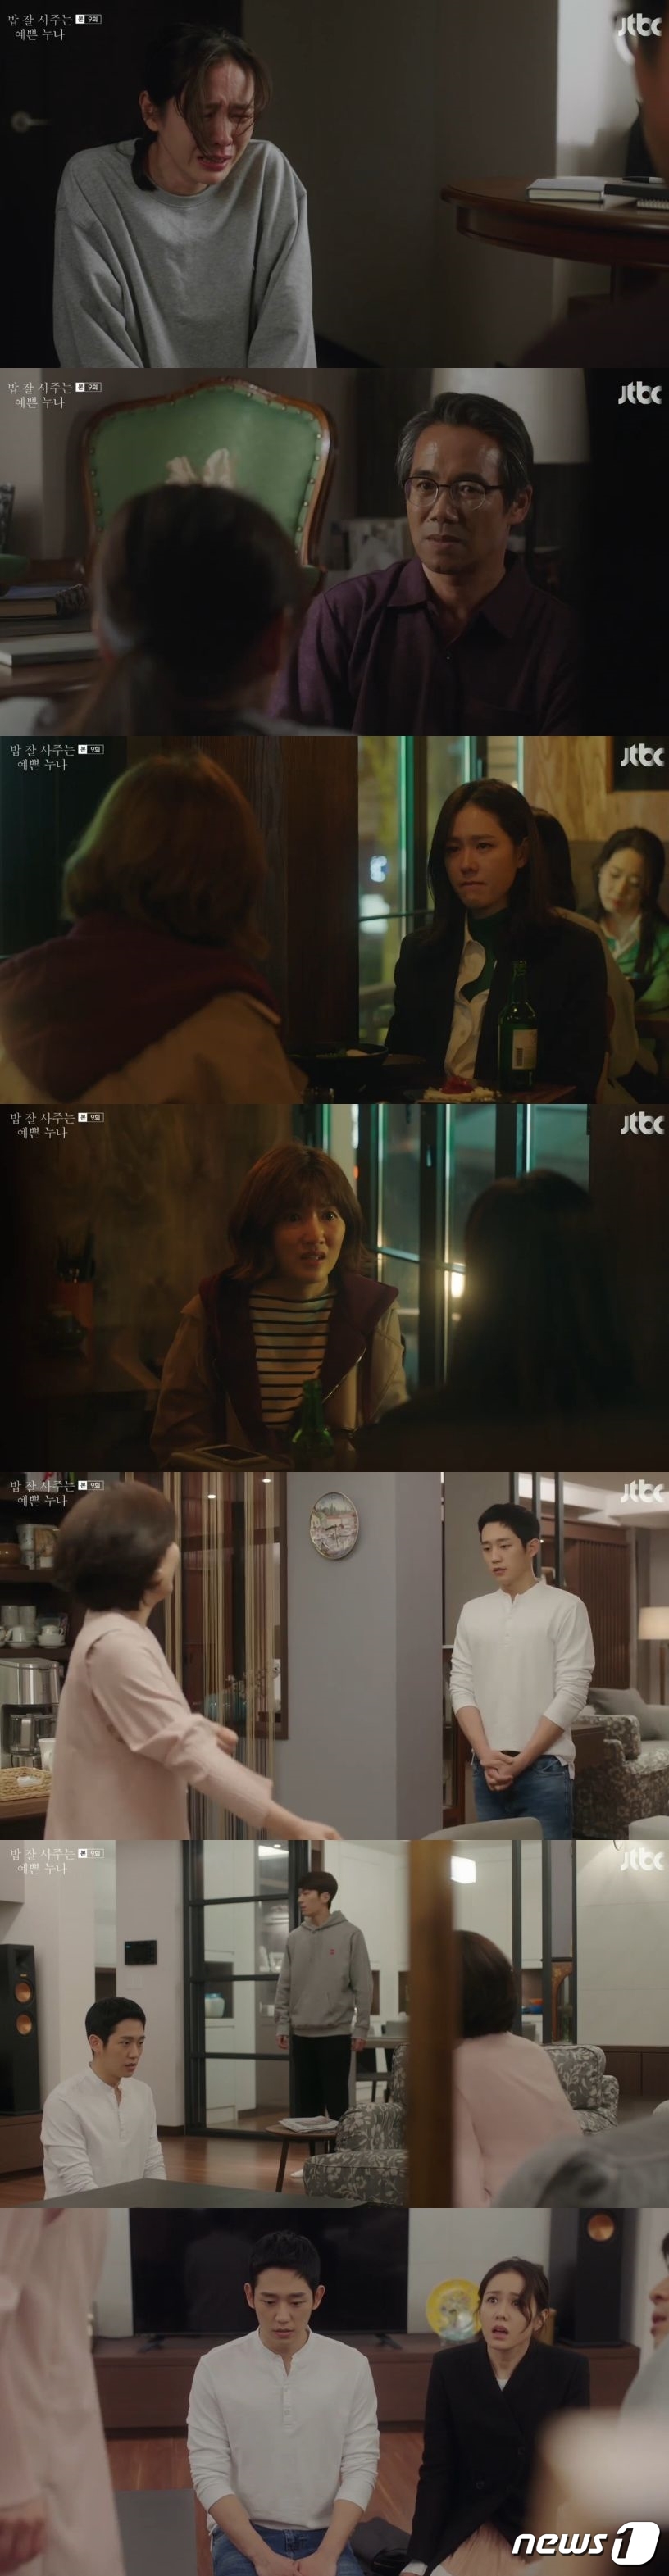 Seoul = = Son Ye-jin and Jung Hae In of A Pretty Sister Who Buys Bob Good struggled to get their love allowed.In JTBCs Bob Good Sister, which aired on the 27th, Yoon Jin-ah was shown to inform her father, Yoon Sang (Oh Man-seok), that she was meeting with Seo Jun-hee (Jung Hae In). Yoon Jin-ah began to kneel and shed tears in front of her father.Yoon Sang, who already knew all the facts, was surprised by Yun Jin-a by saying, Where is Jun-hee? Yun Jin-a said, Did you know your dad?, and Yoon Sang said, What is so difficult to say? I am stupid. At the same time, however, Yoon Jin-ahs friend, Primary Election (So-yeon Jang), was shocked to find his sketches of Yun Jin-ah in his younger brother Jun-hees house.The Primary Election cried and found his mothers cemetery and poured tears, saying, Mom, Junhee should not make it difficult.Primary selection began to feel betrayed by recalling the suspicious situations of the two.Jina knew that Primary selection knew the truth and drank together.The Primary Election asked, Let me ask you first, do you like each other or play with Junhee?Jina said, I like it more. Jina said, I know that it is hard to understand you no matter what I say.But I can not live without you. The Primary Election said, What are you going to do with both of you now? Jin-a said, Im sorry, but I never stopped because I was your brother. I had no time to think about you. So I came.Like long friendships, the two crises did not last long.The Primary Election eventually decided to admit the relationship between the two and laughed at the photo of Junhee as a child. Meanwhile, Seo Jun-hee at the end of the broadcast decided to tell the truth to Jin-ahs mother who gave her a picture, saying, We are a match,At the same time, Jina arrived at home, and the two knelt side by side and spoke to her mother, and her mother grabbed the back goal.